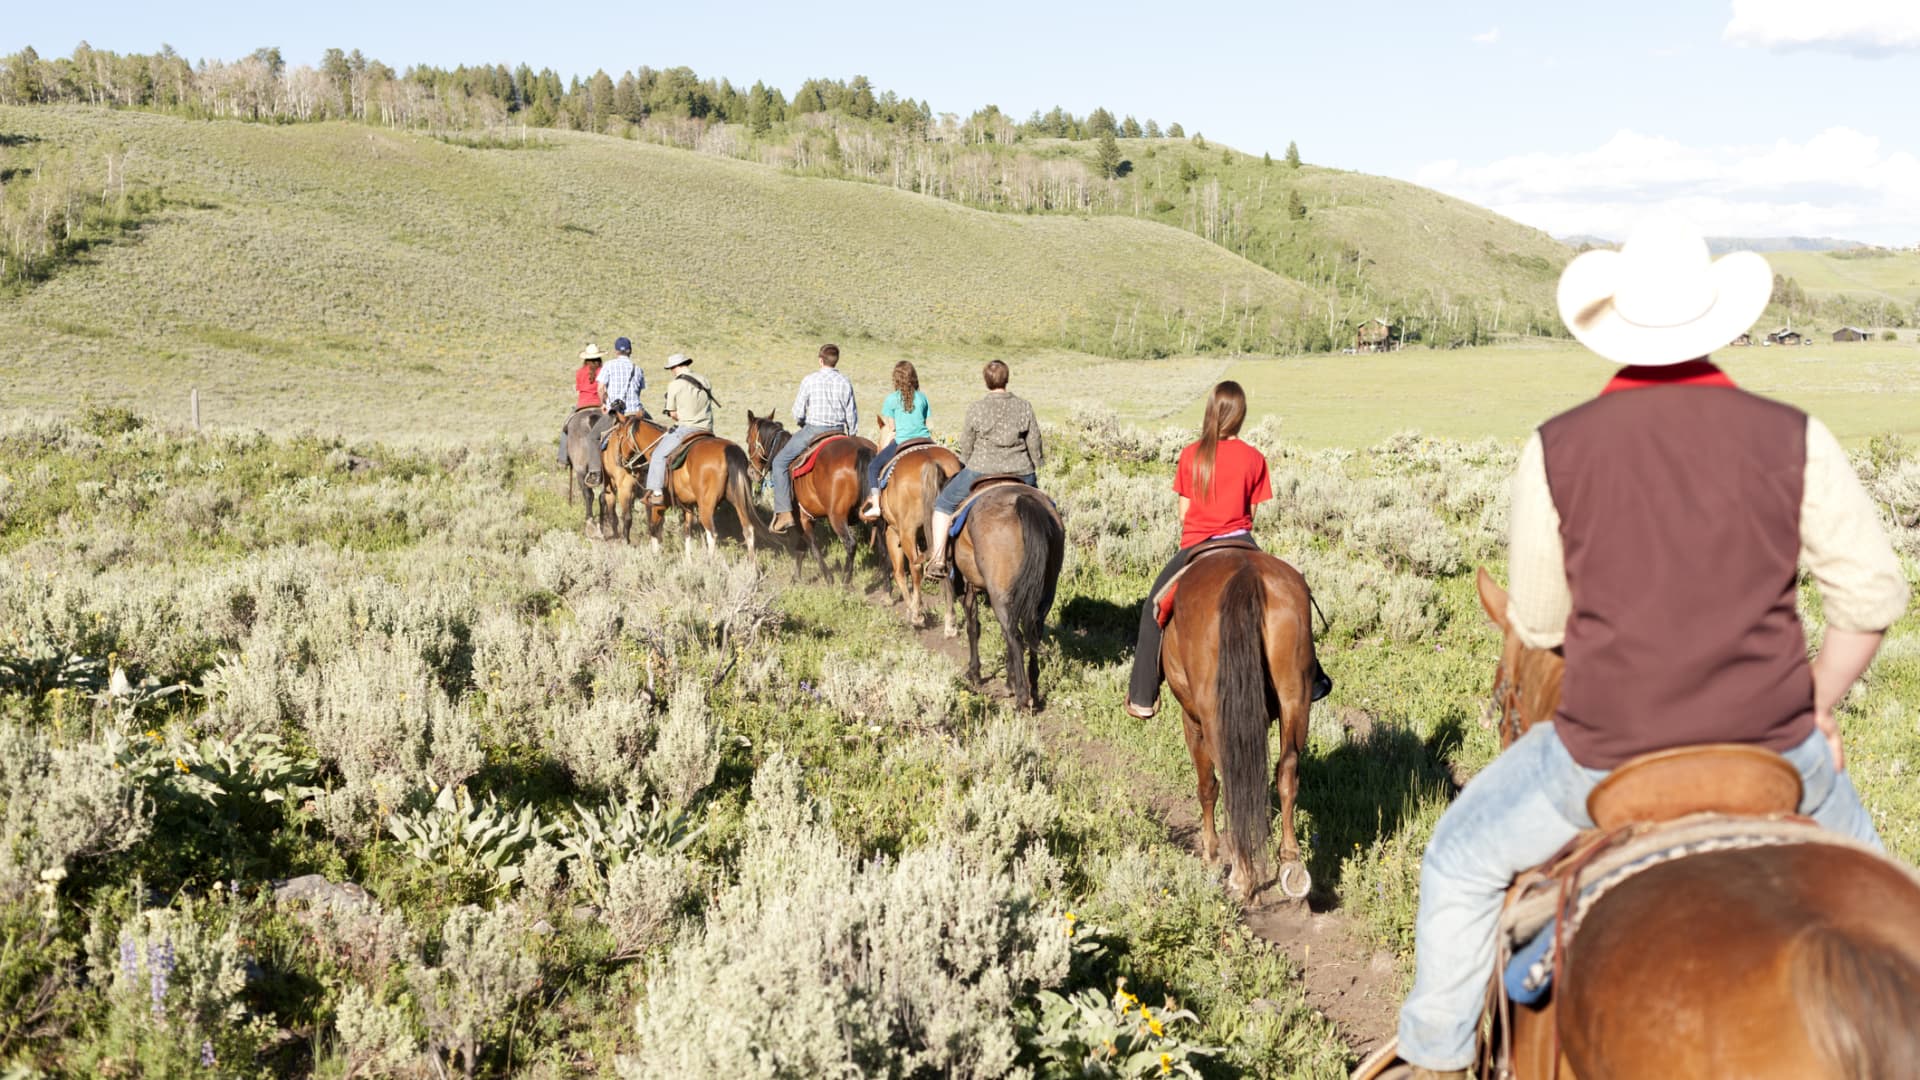 Horseback riders embarking on a trail in West Yellowstone, Montana.